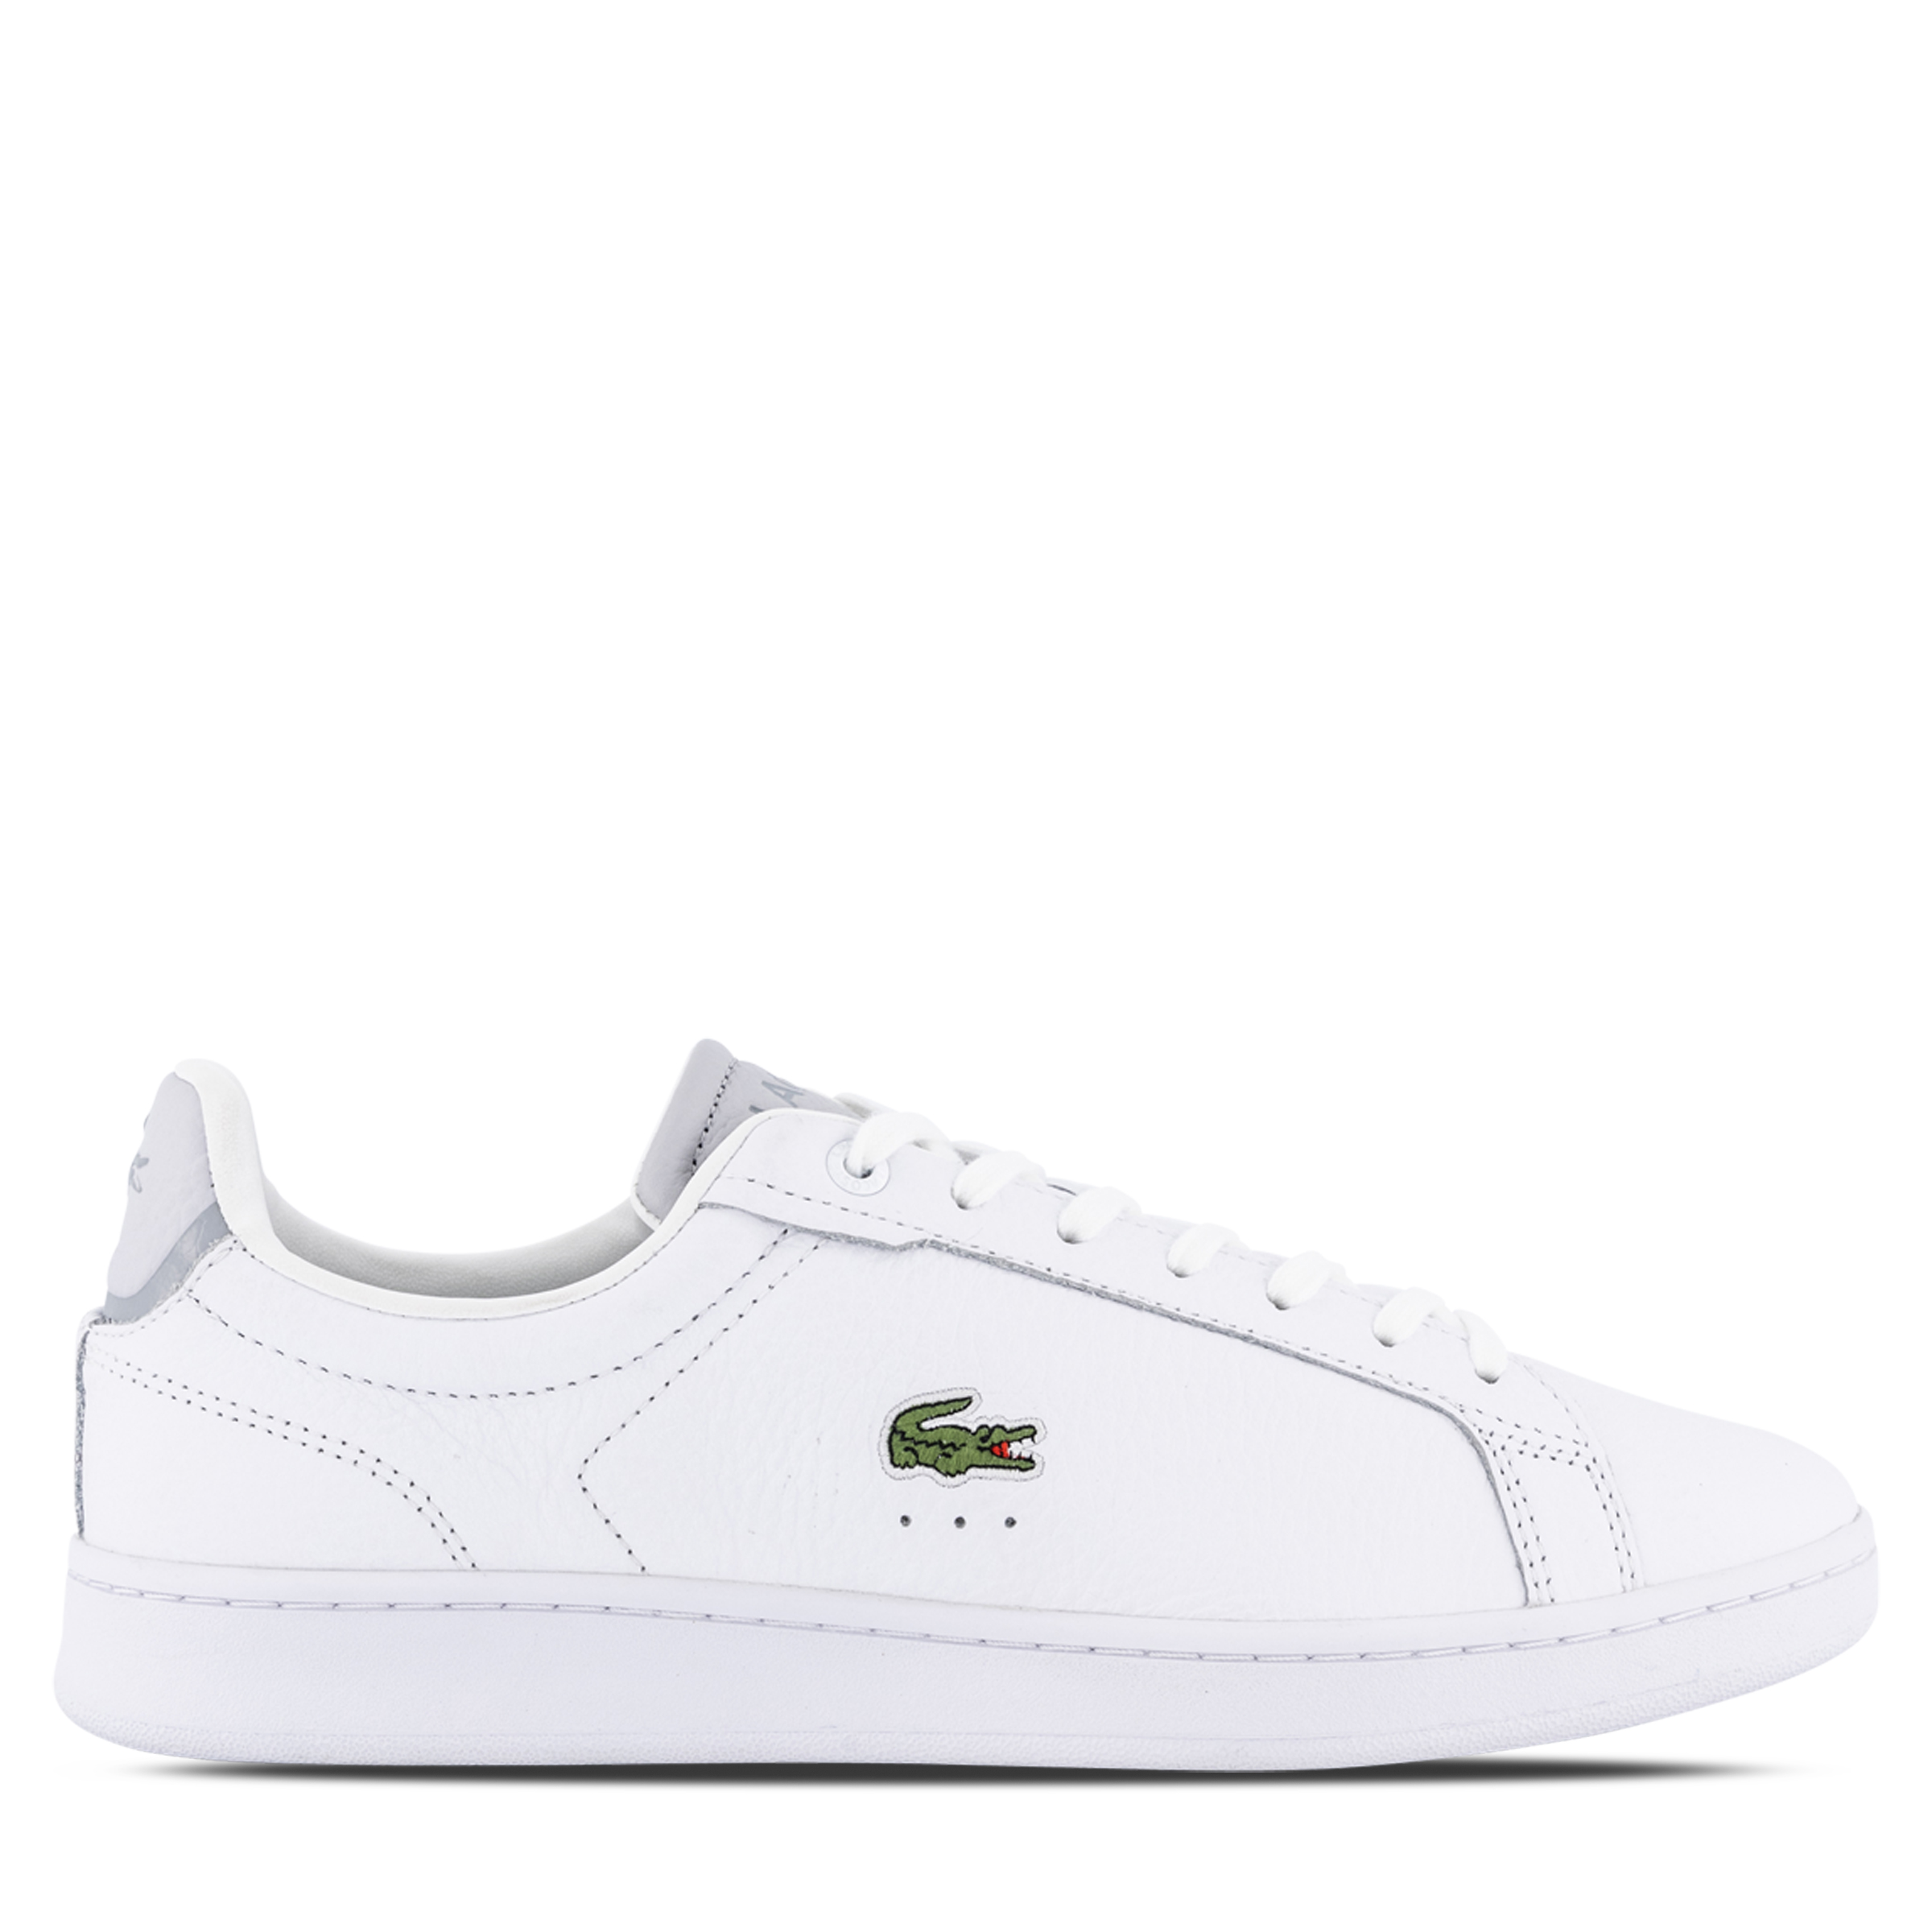 Lacoste Carnaby Pro White/Grey | Hype DC